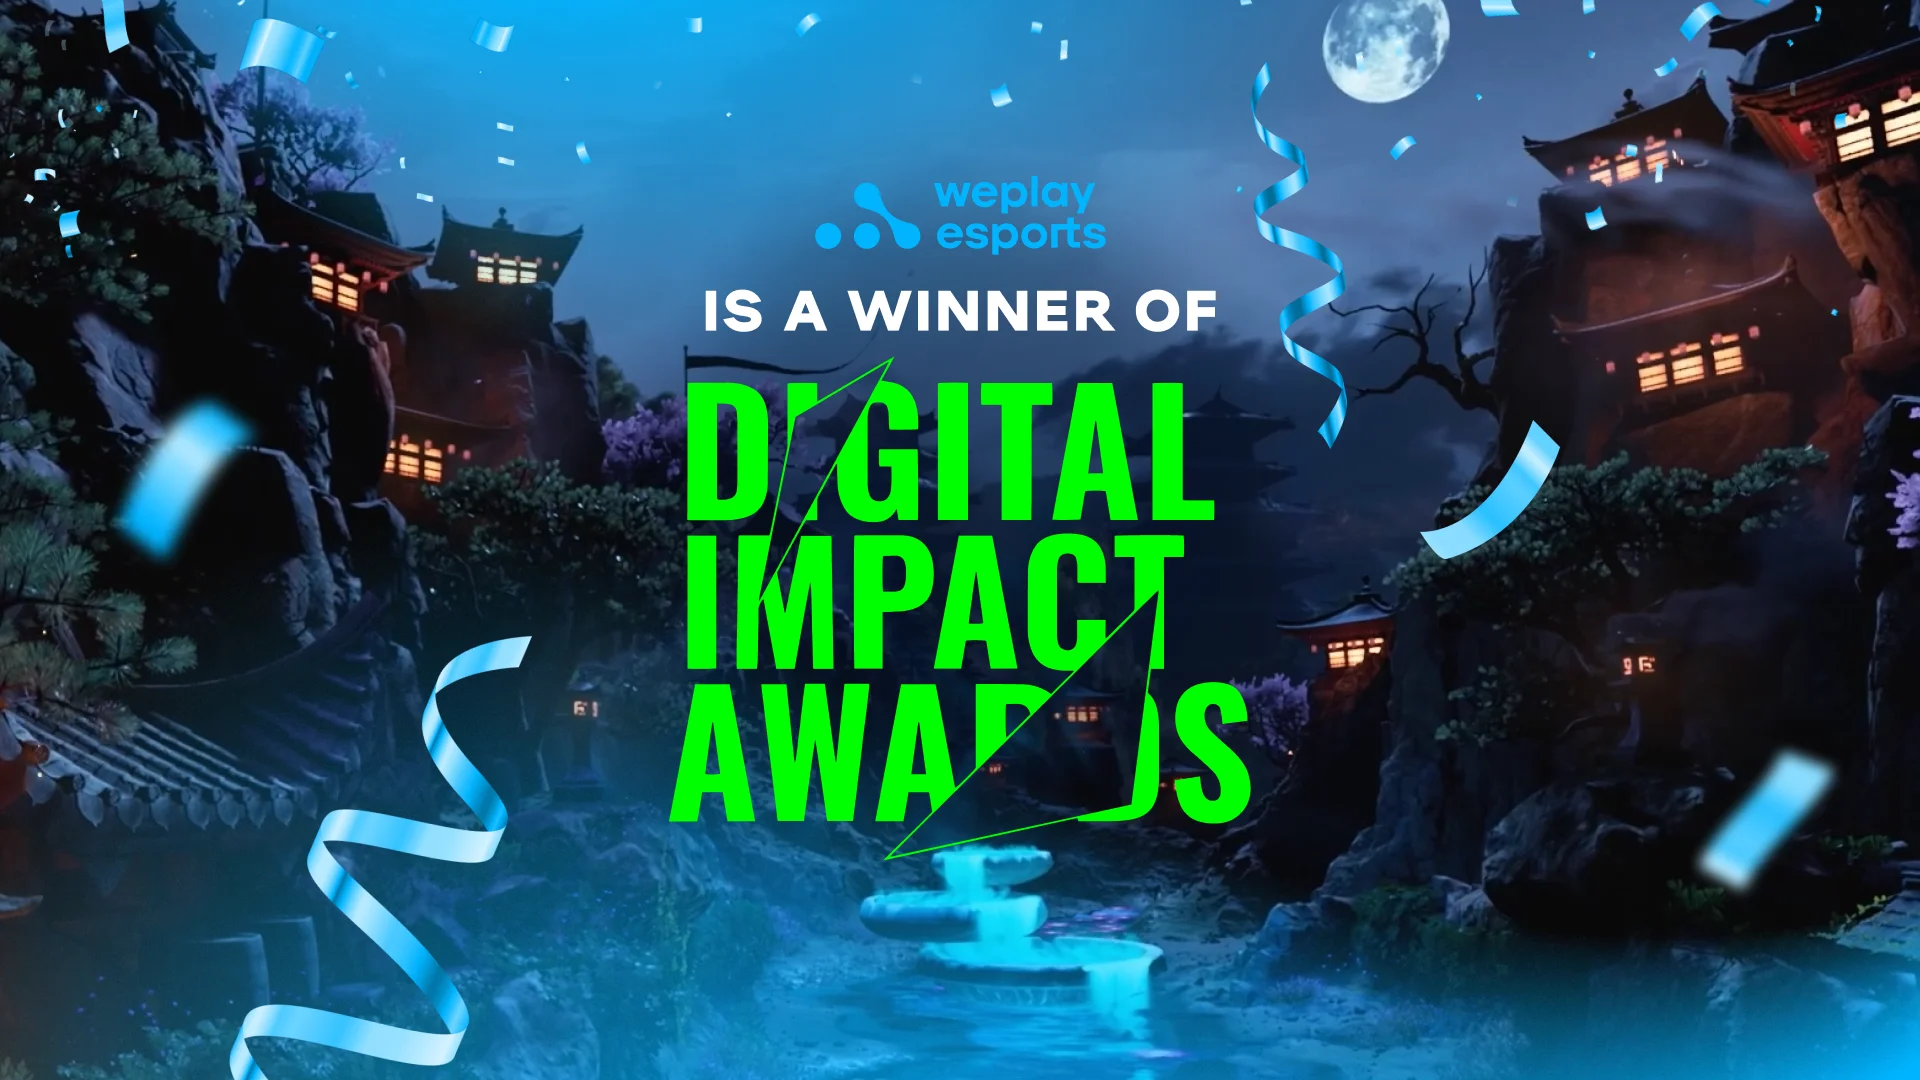 WePlay Esports got bronze in the Digital Impact Awards. Visual: WePlay Holding